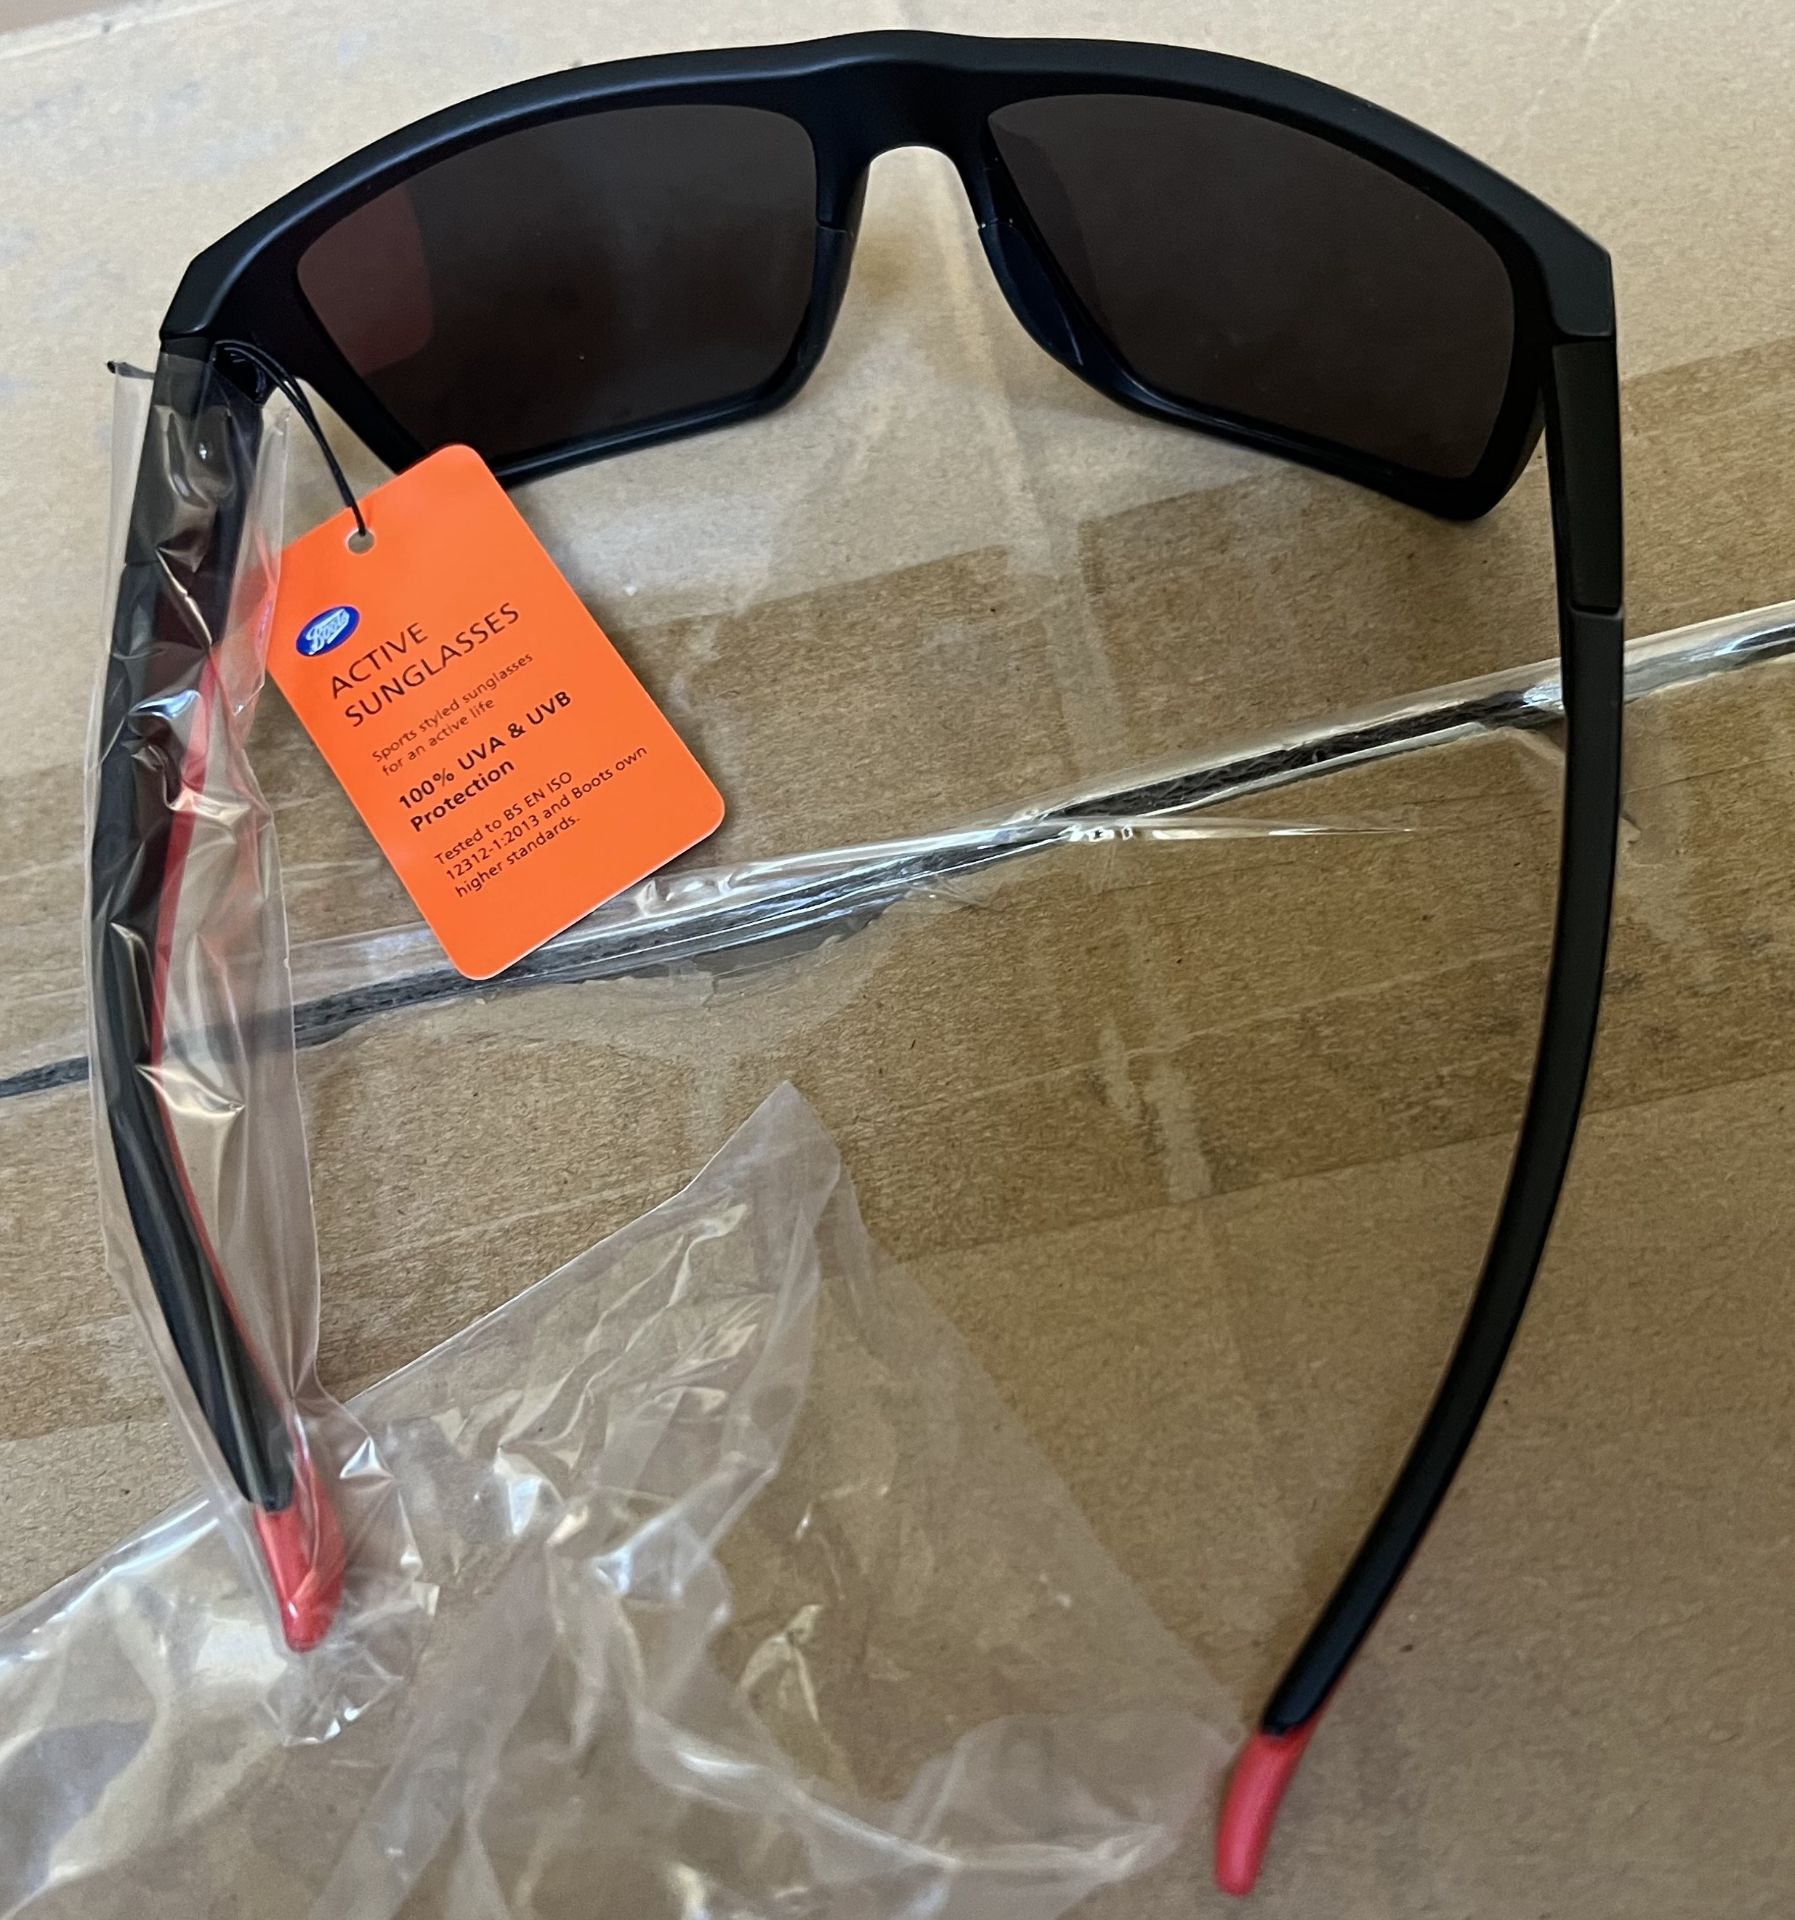 20 x Boots Active Sports Styled Sunglasses 100% UVA - (NEW) - BOOTS RRP Â£500 ! - Image 3 of 3